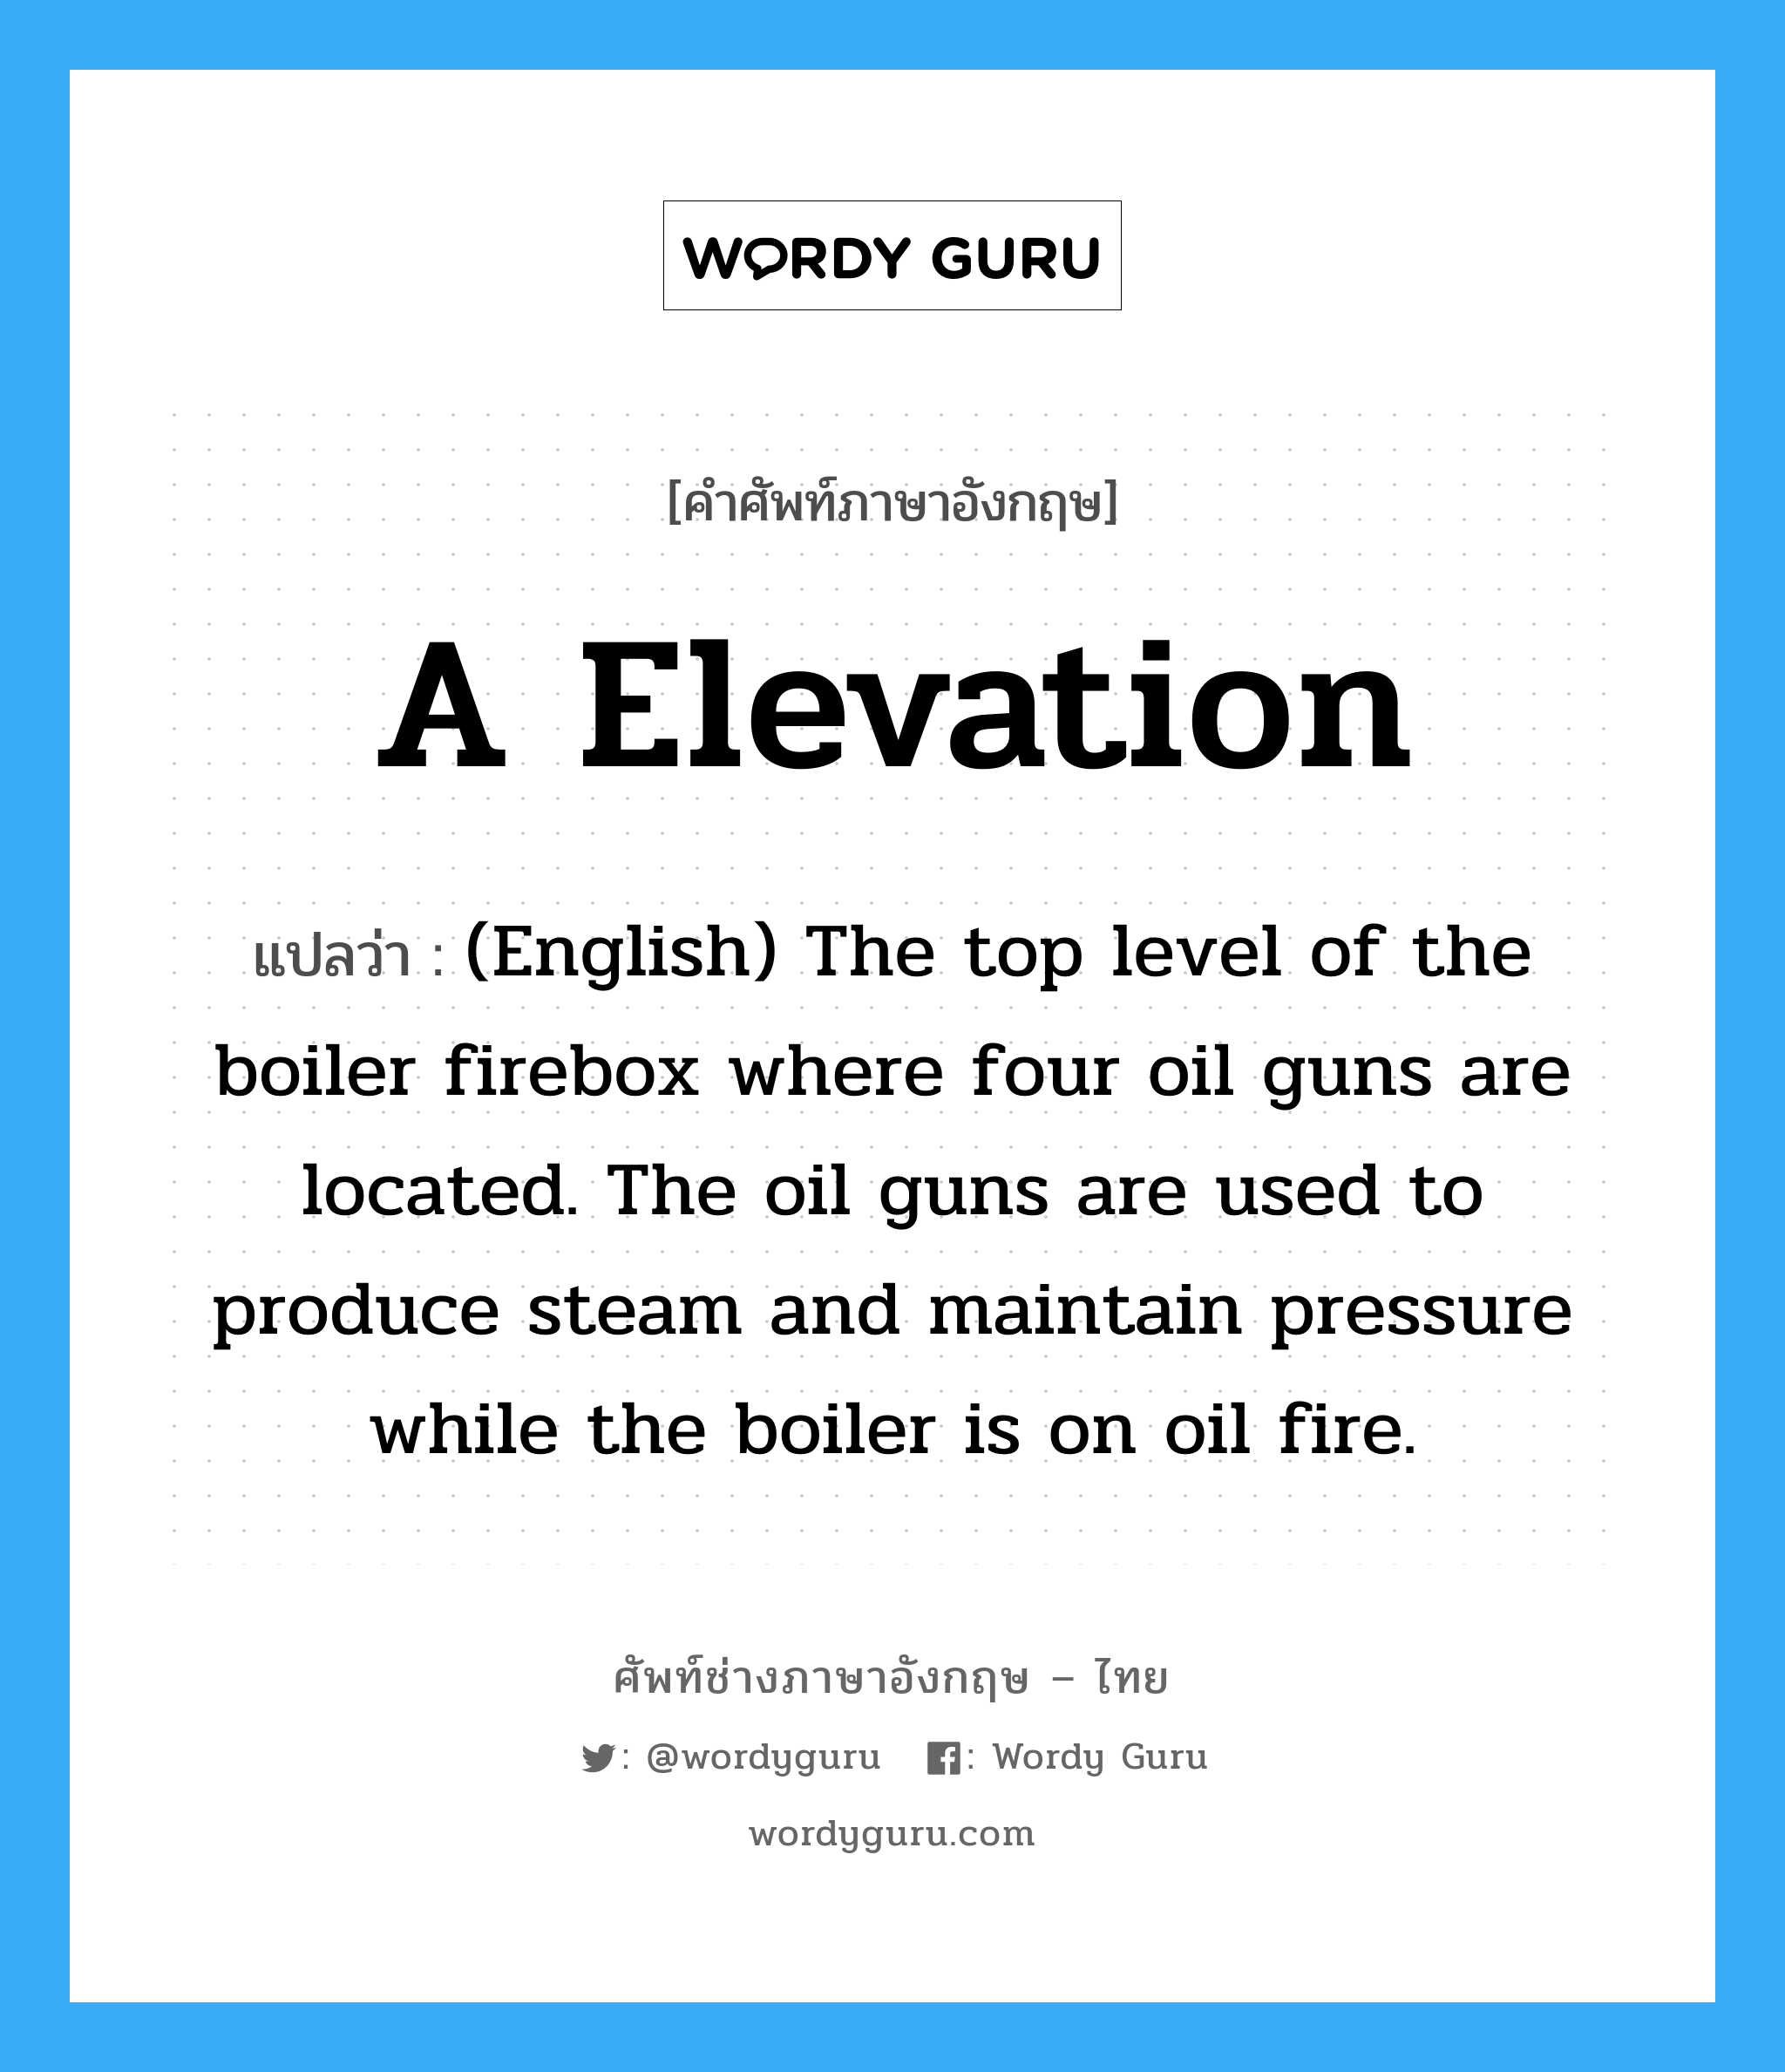 A Elevation แปลว่า?, คำศัพท์ช่างภาษาอังกฤษ - ไทย A Elevation คำศัพท์ภาษาอังกฤษ A Elevation แปลว่า (English) The top level of the boiler firebox where four oil guns are located. The oil guns are used to produce steam and maintain pressure while the boiler is on oil fire.